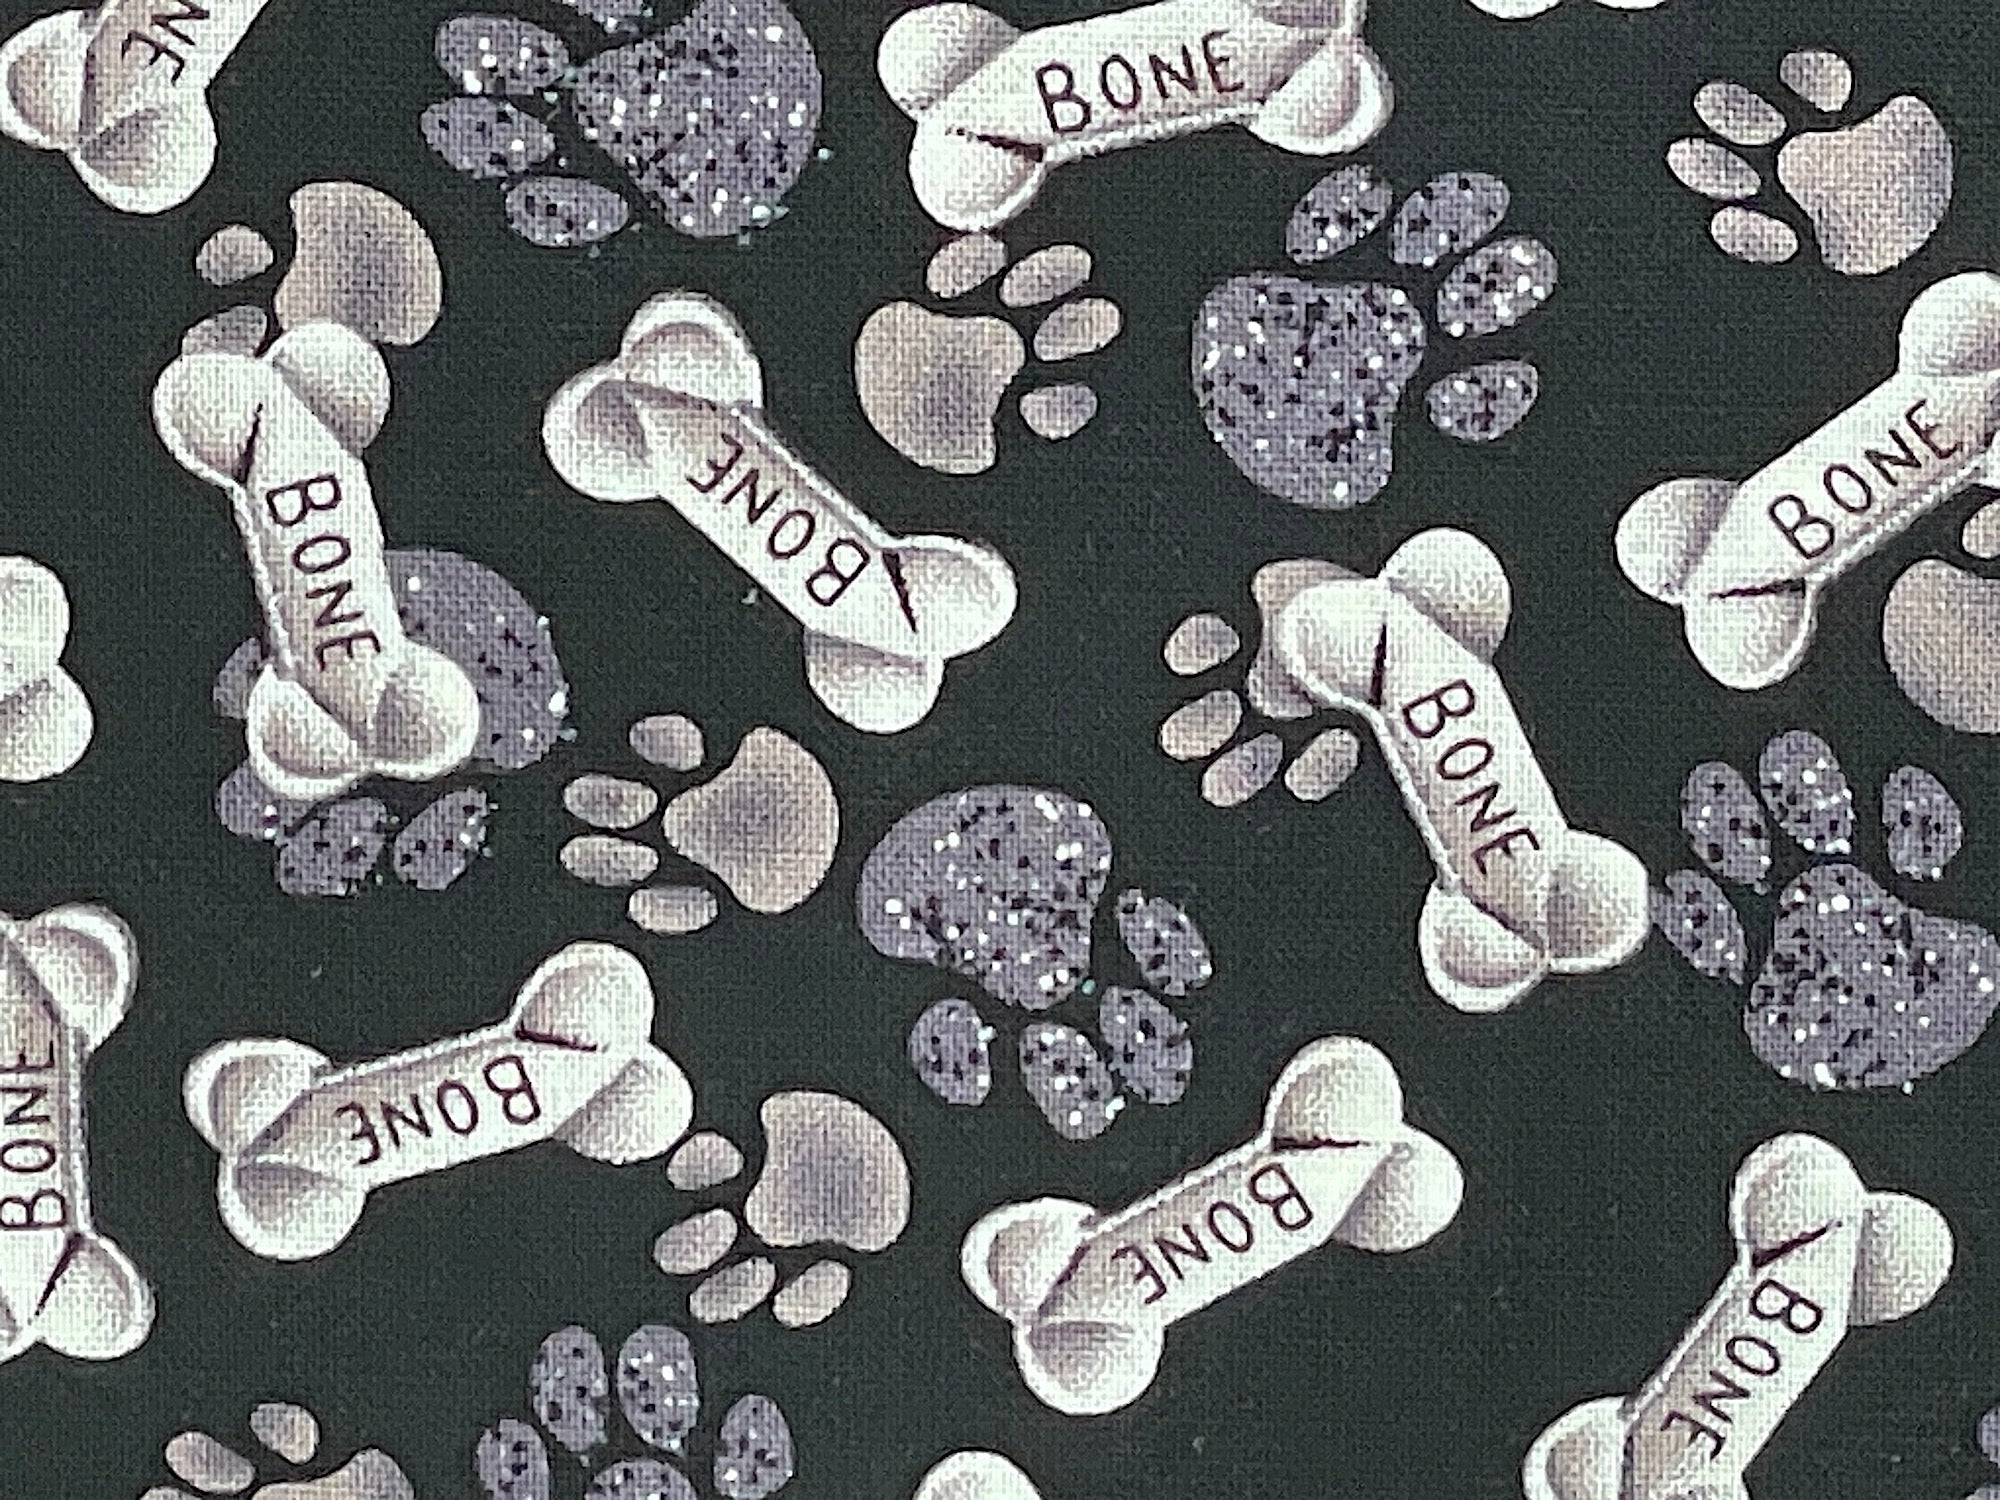 Close up of dog bones and paw prints.